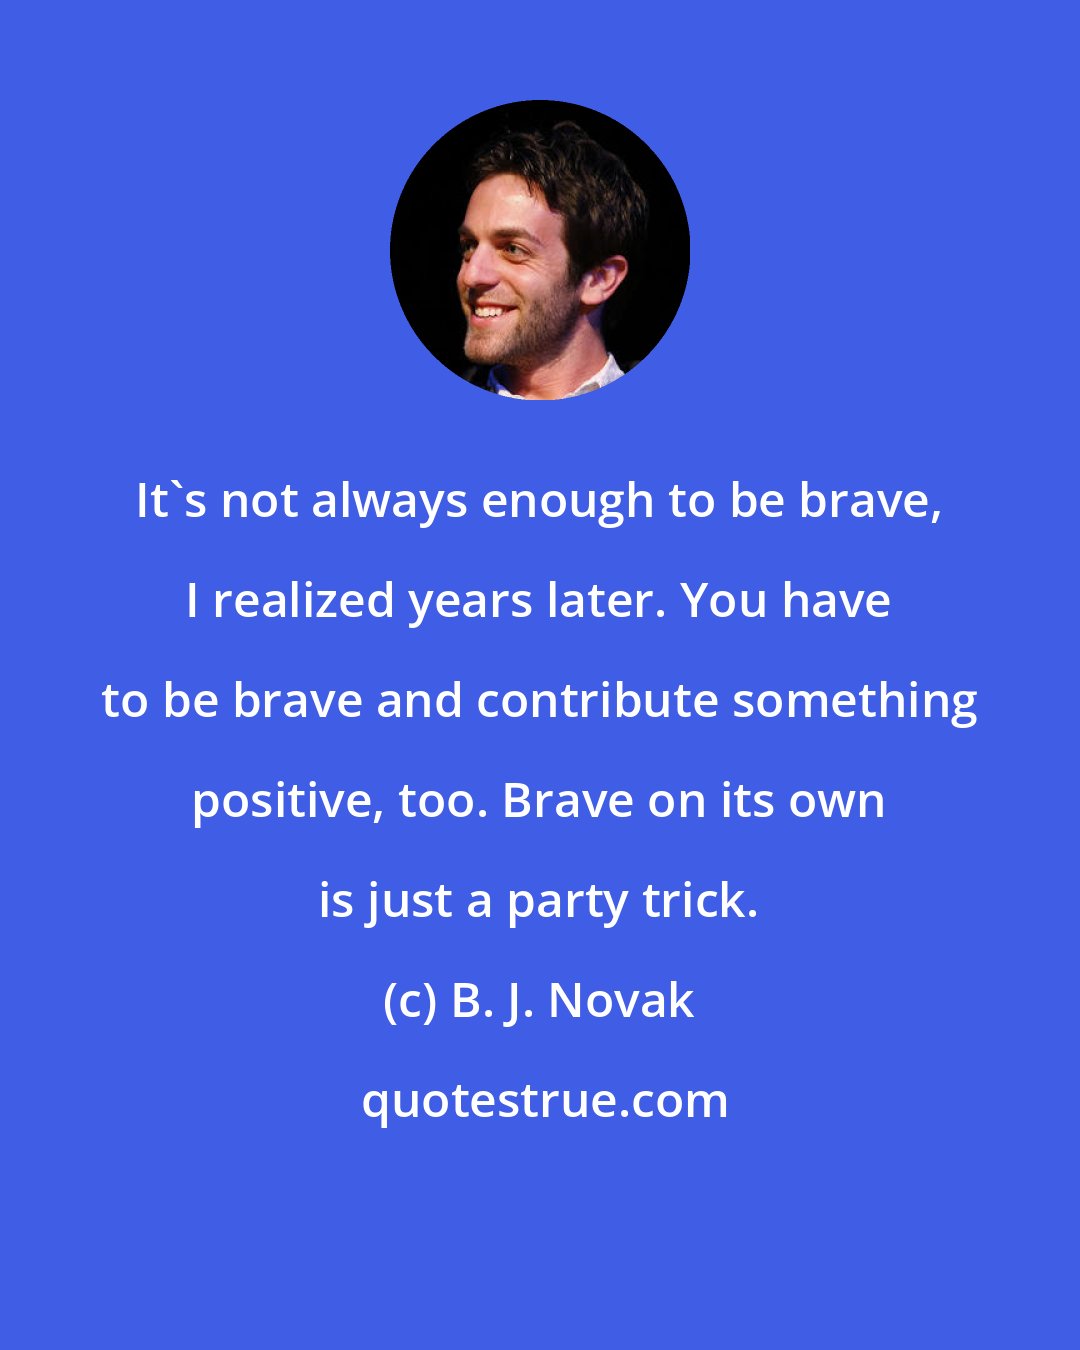 B. J. Novak: It's not always enough to be brave, I realized years later. You have to be brave and contribute something positive, too. Brave on its own is just a party trick.